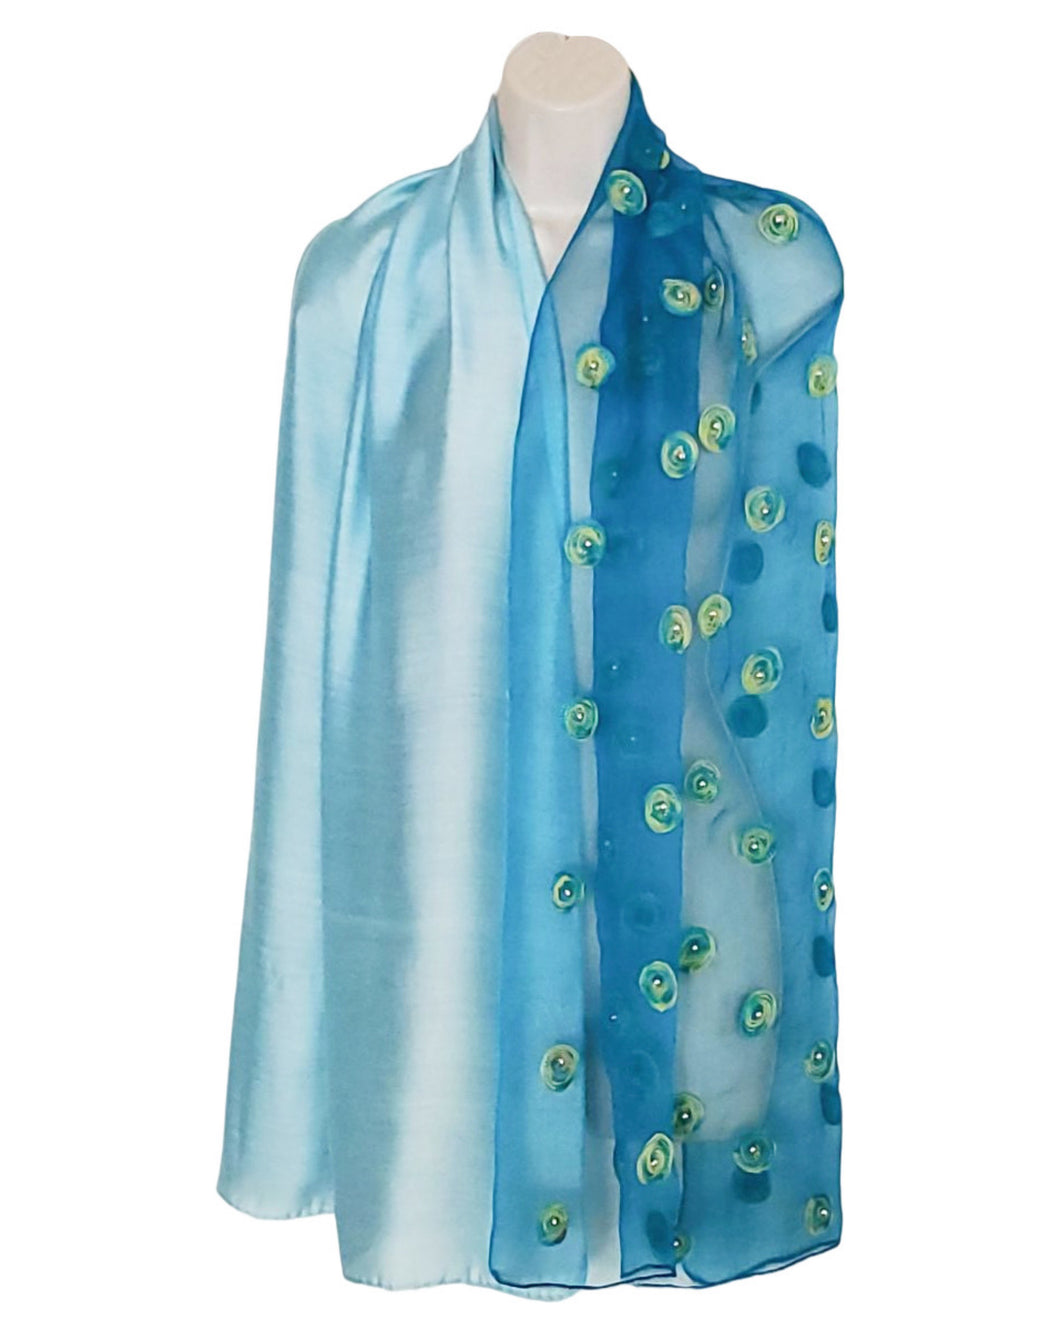 Tender Love (Turquoise) Scarf